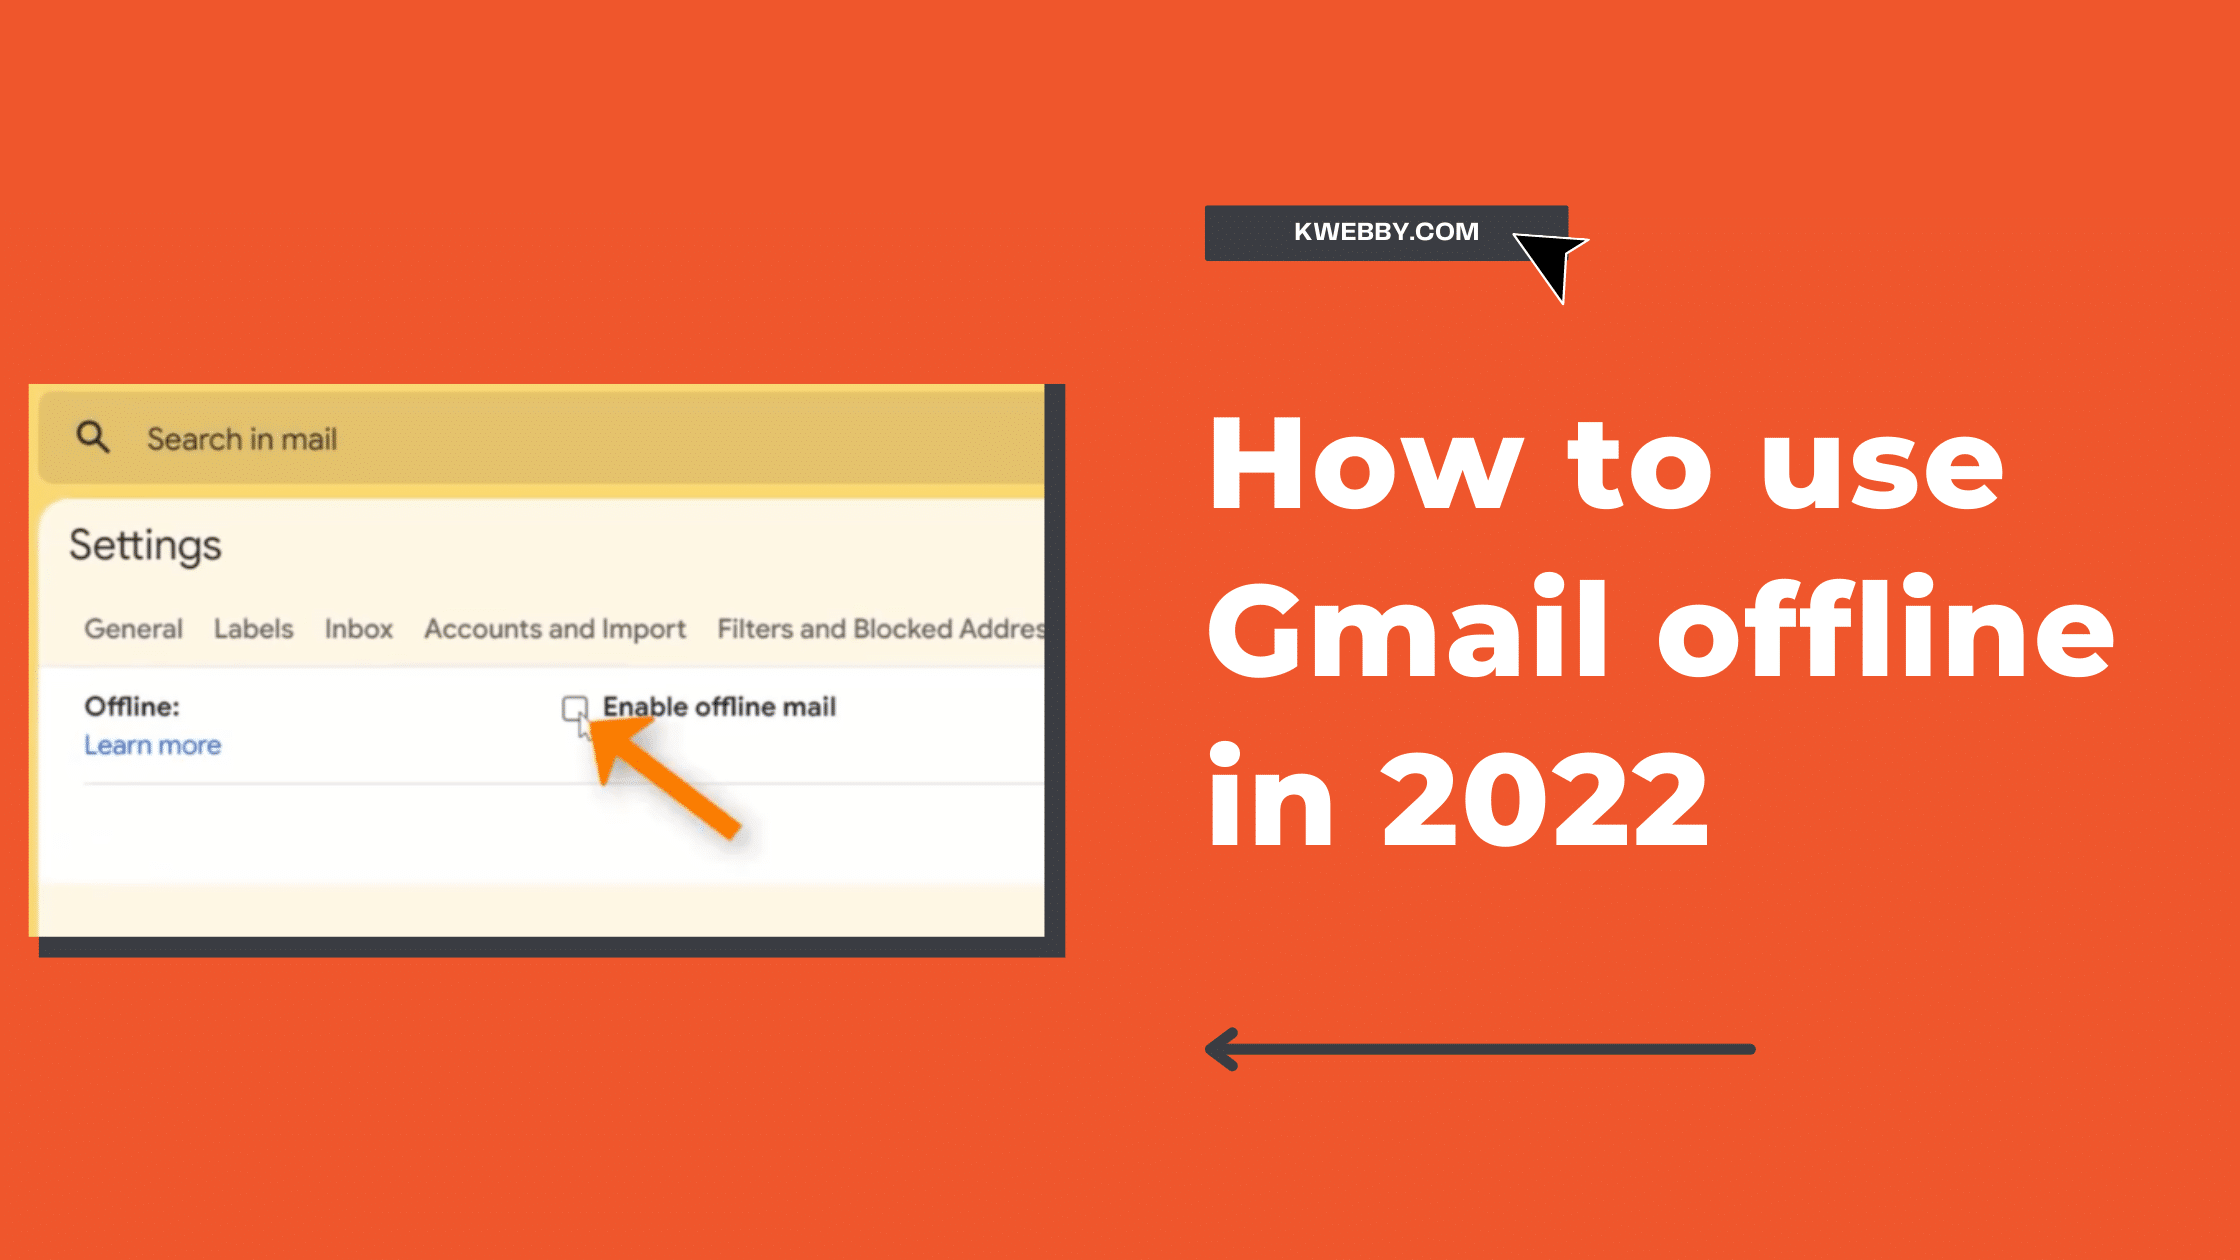 How to use Gmail offline in 2022